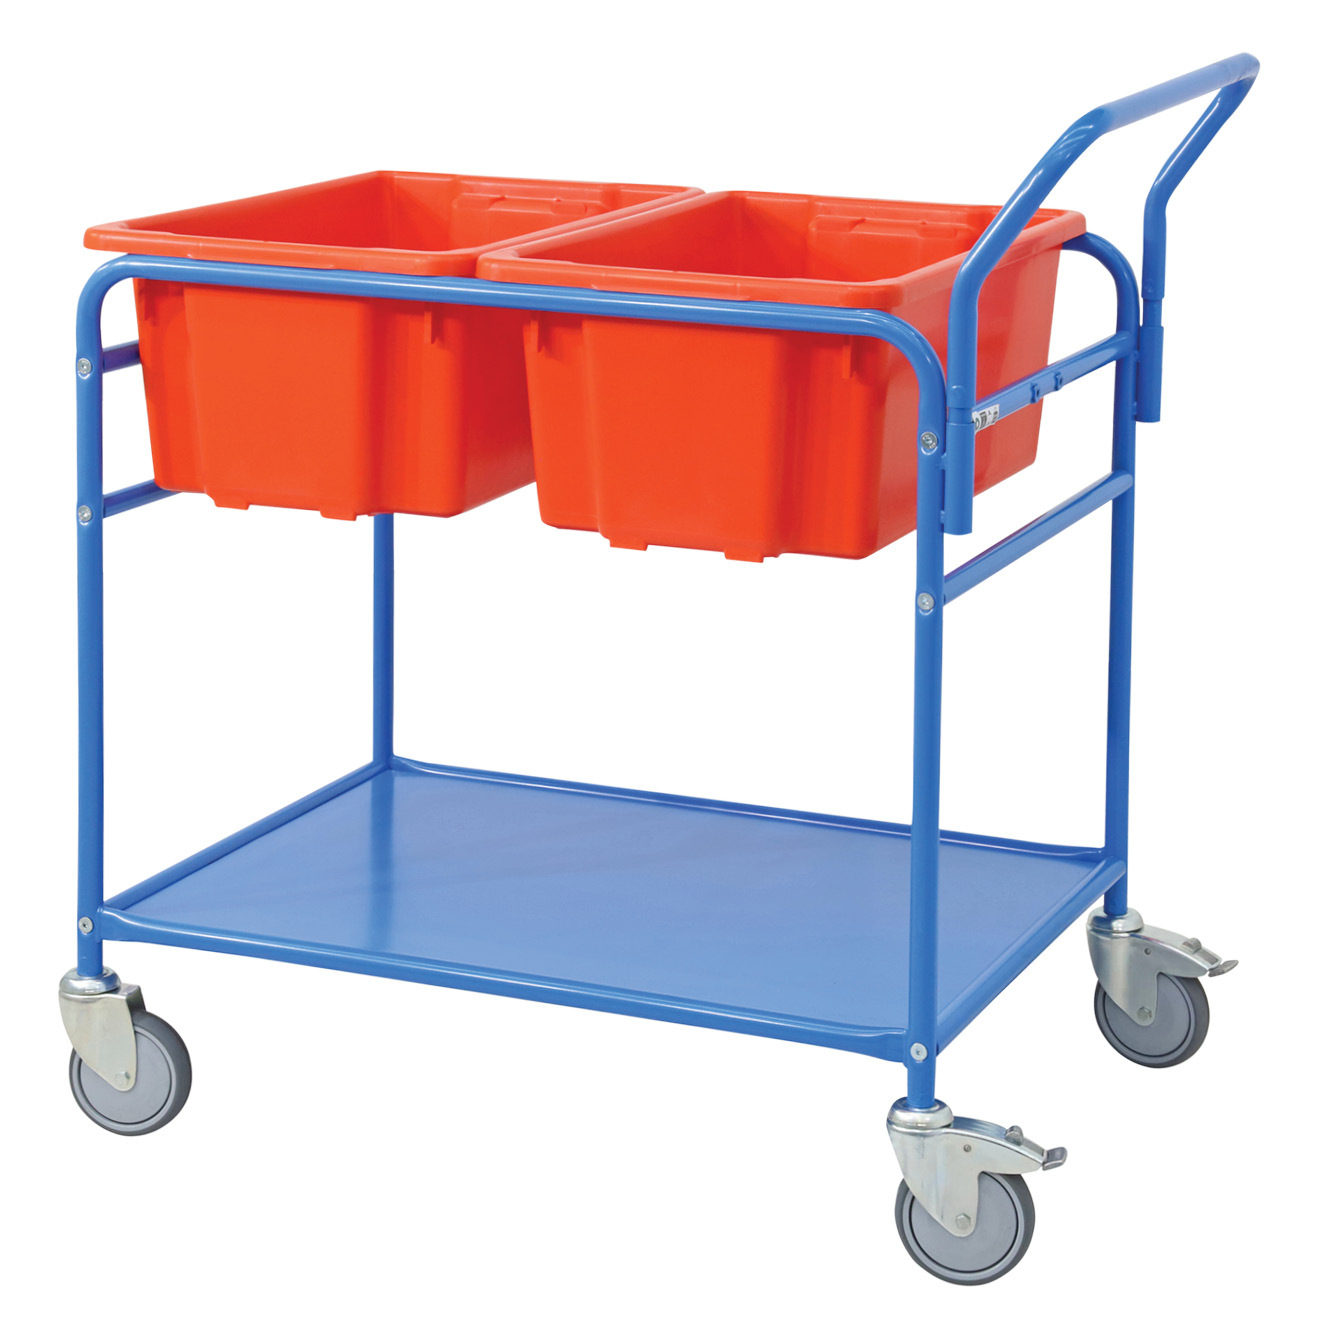 Double Tub Order Picking Trolley